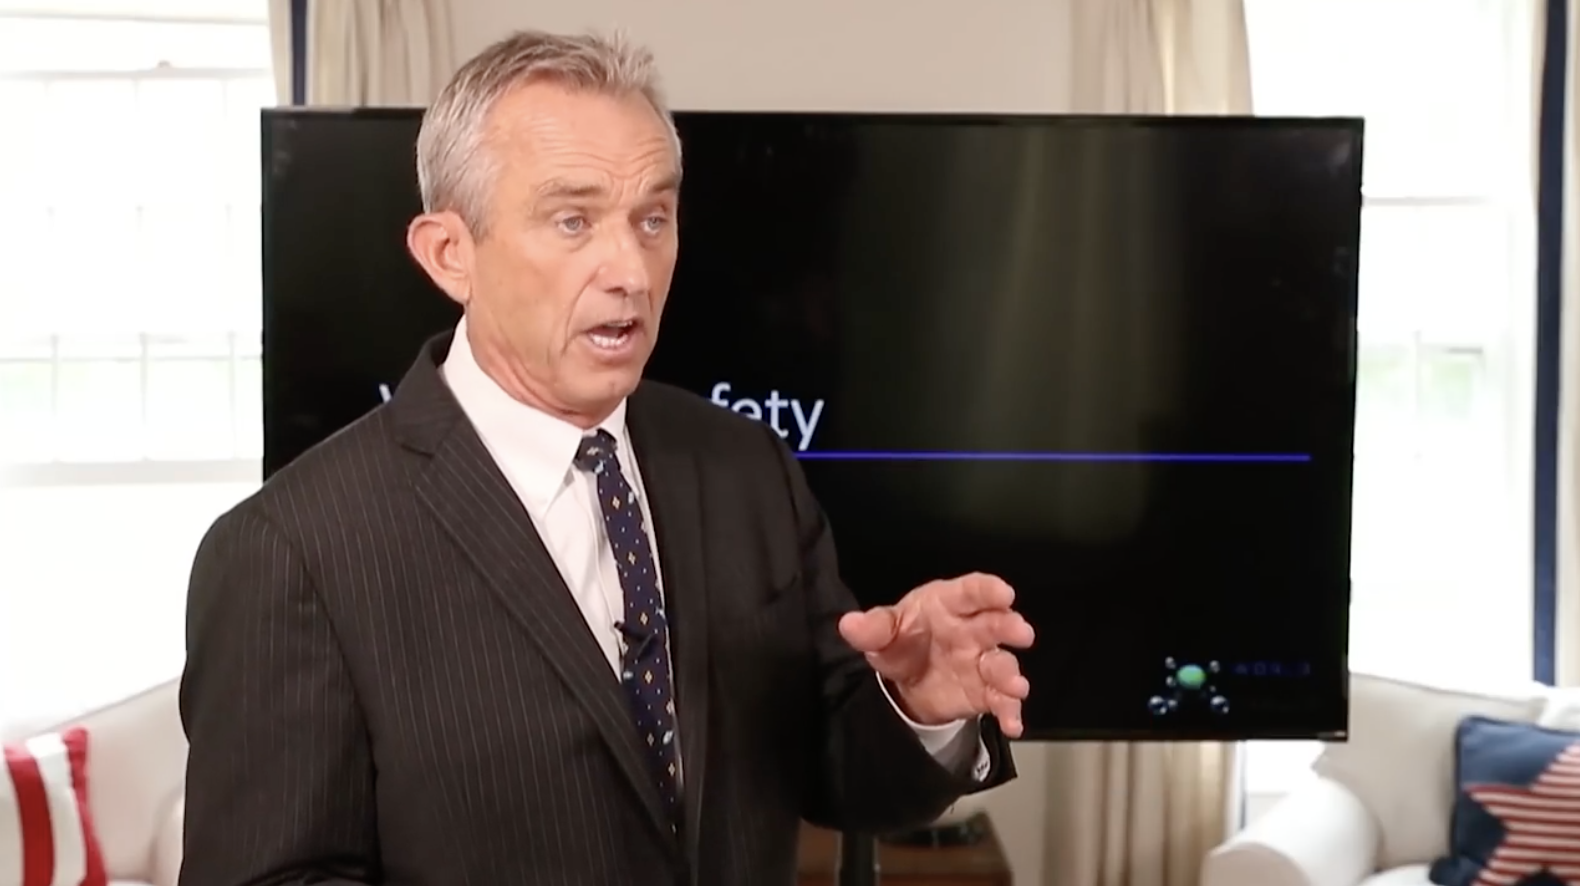 Robert F. Kennedy Jr. warns that Fauci, Gates are committing mass genocide against humanity